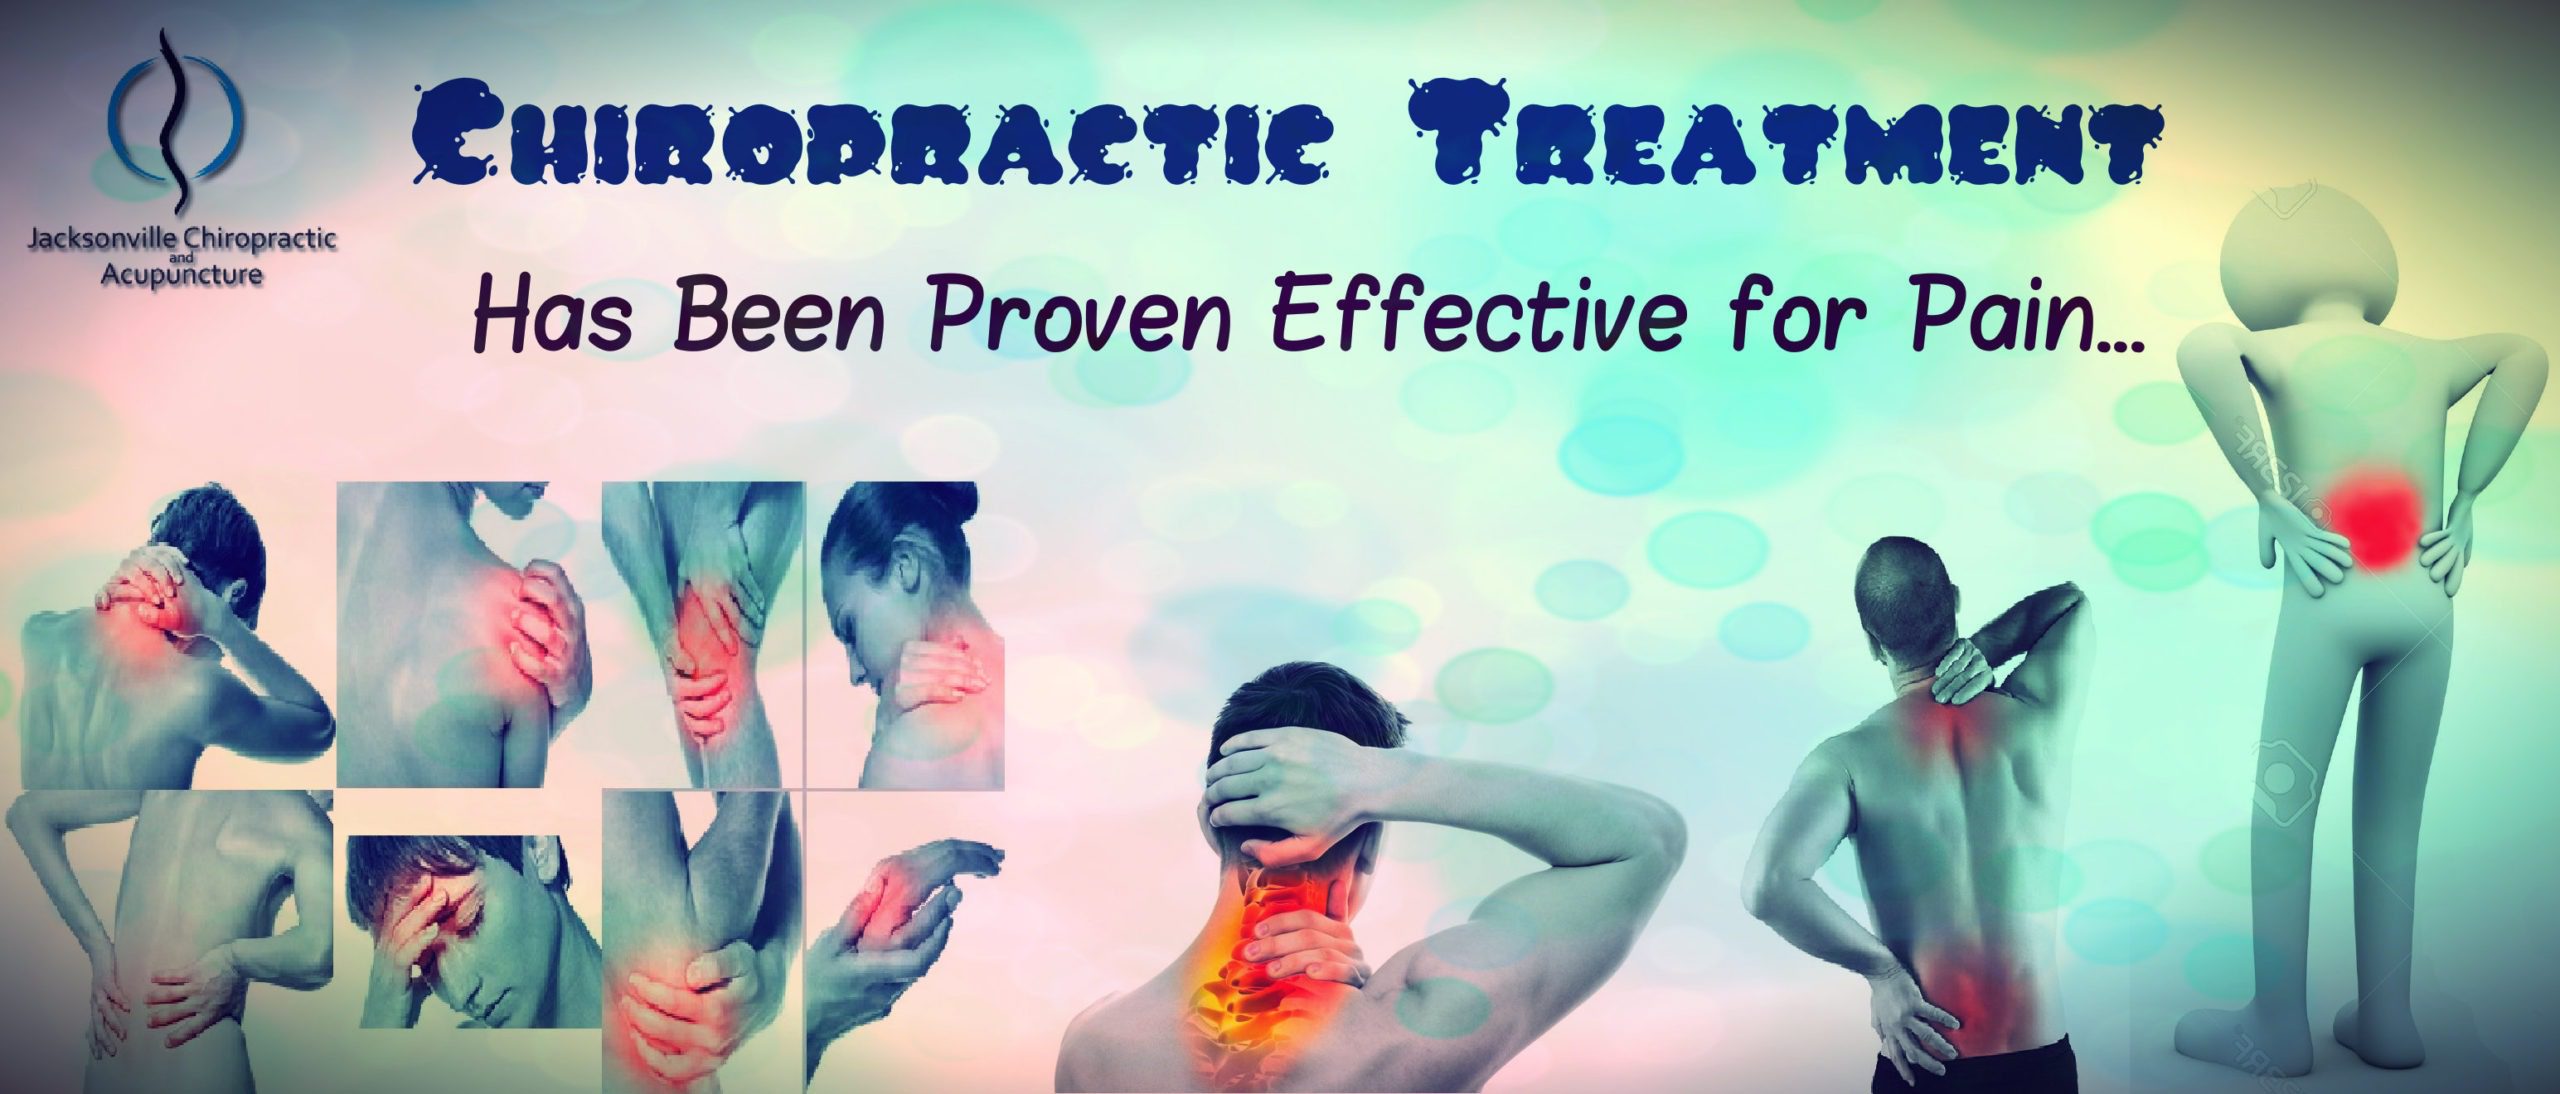 Chiropractic Treatment Has Been Proven Effective for Pain.